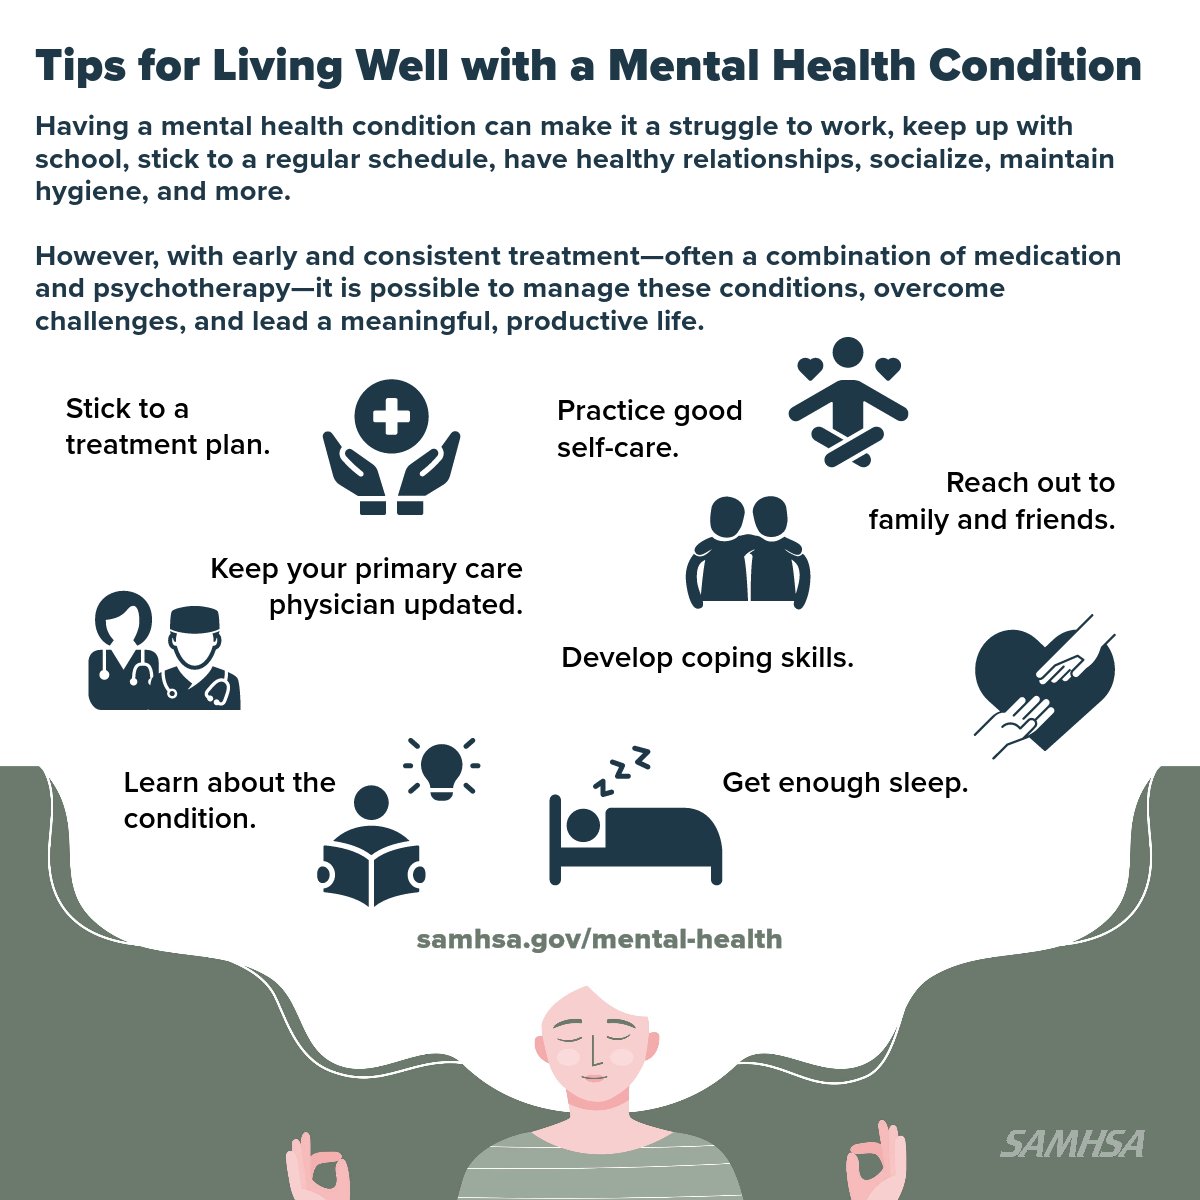 Having a mental health condition can disrupt relationships, make it hard to work & more. With support & treatment it’s possible to lead a meaningful, productive life. Here are some tips for living well with a mental heath condition: samhsa.gov/mental-health #StressAwarenessMonth